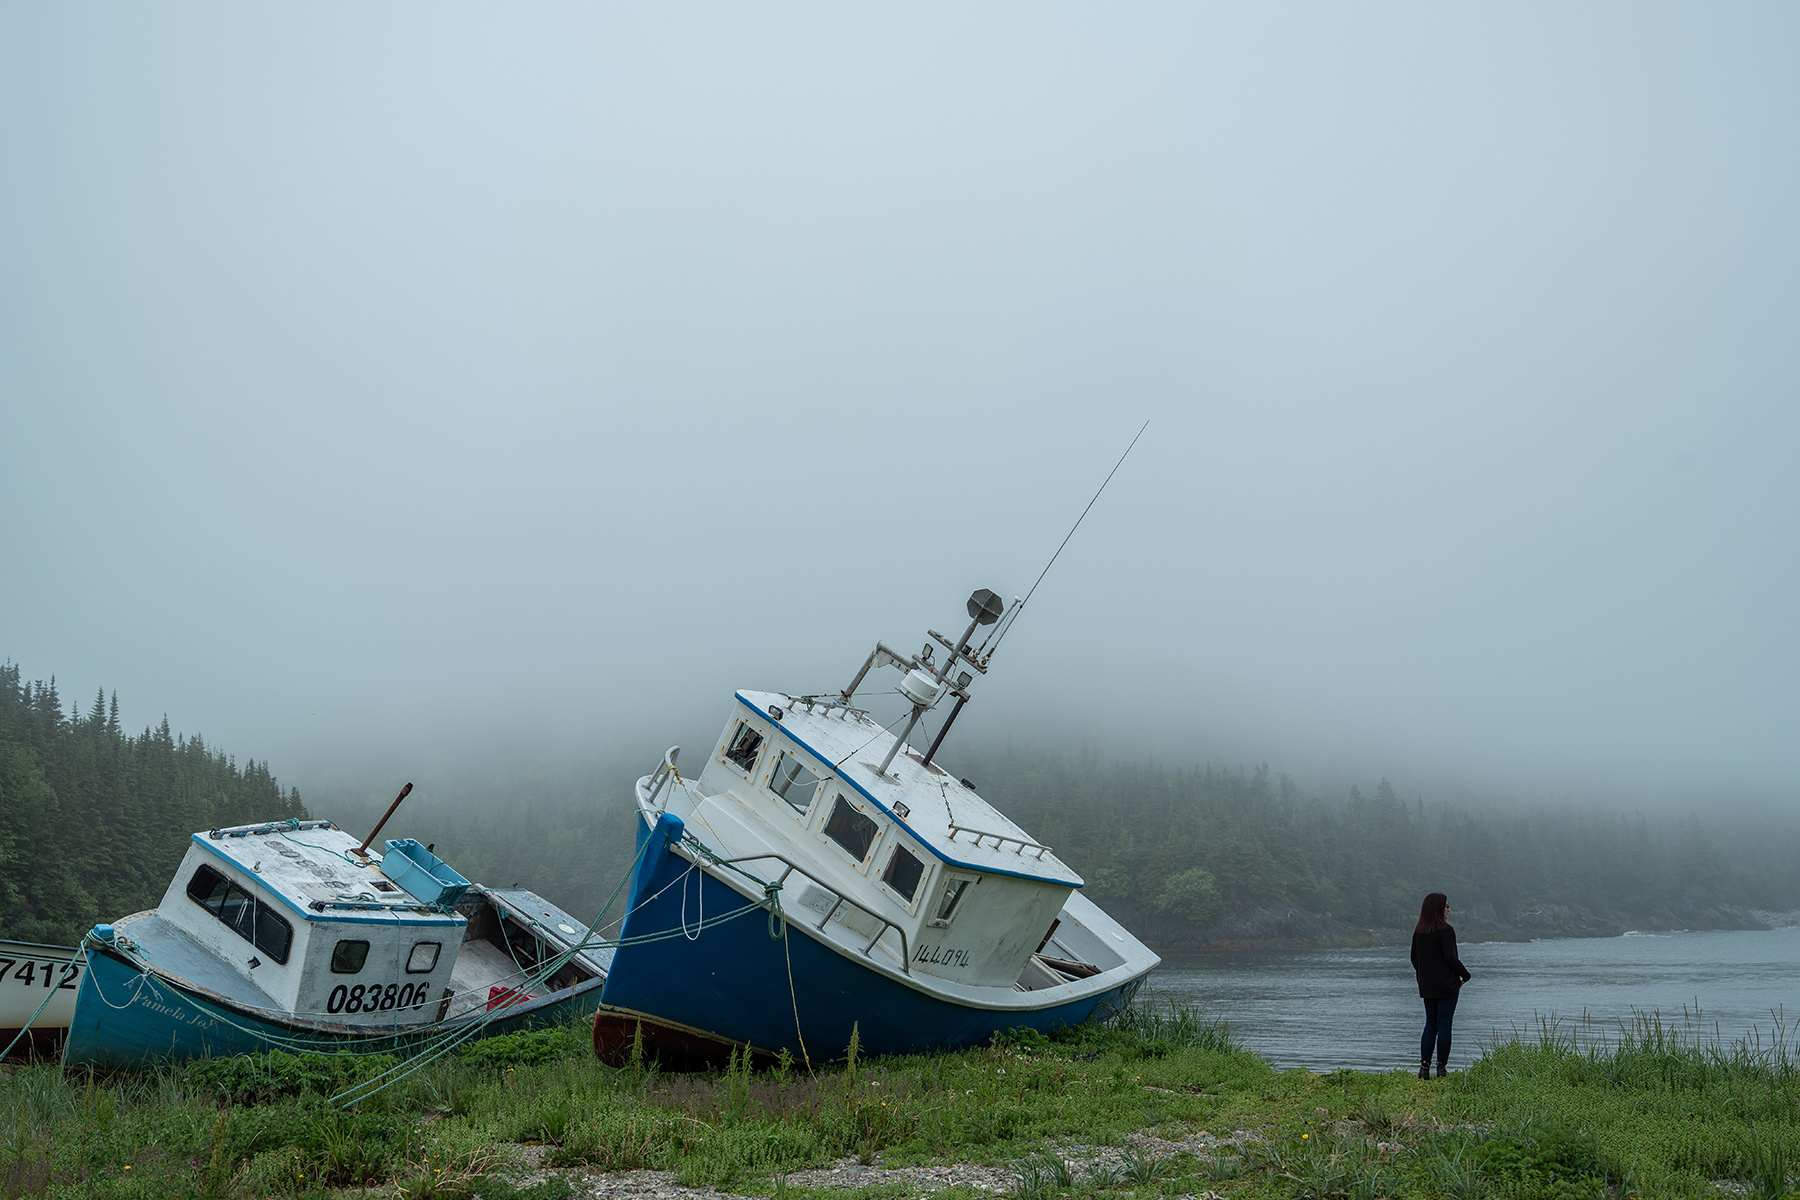 Photo of an anonymous woman, Jane Doe, facing away from the camera. She is standing on the edge of a body of water with beached fishing boats on the land beside her. The sky is grey and mist obscures trees along the coast.